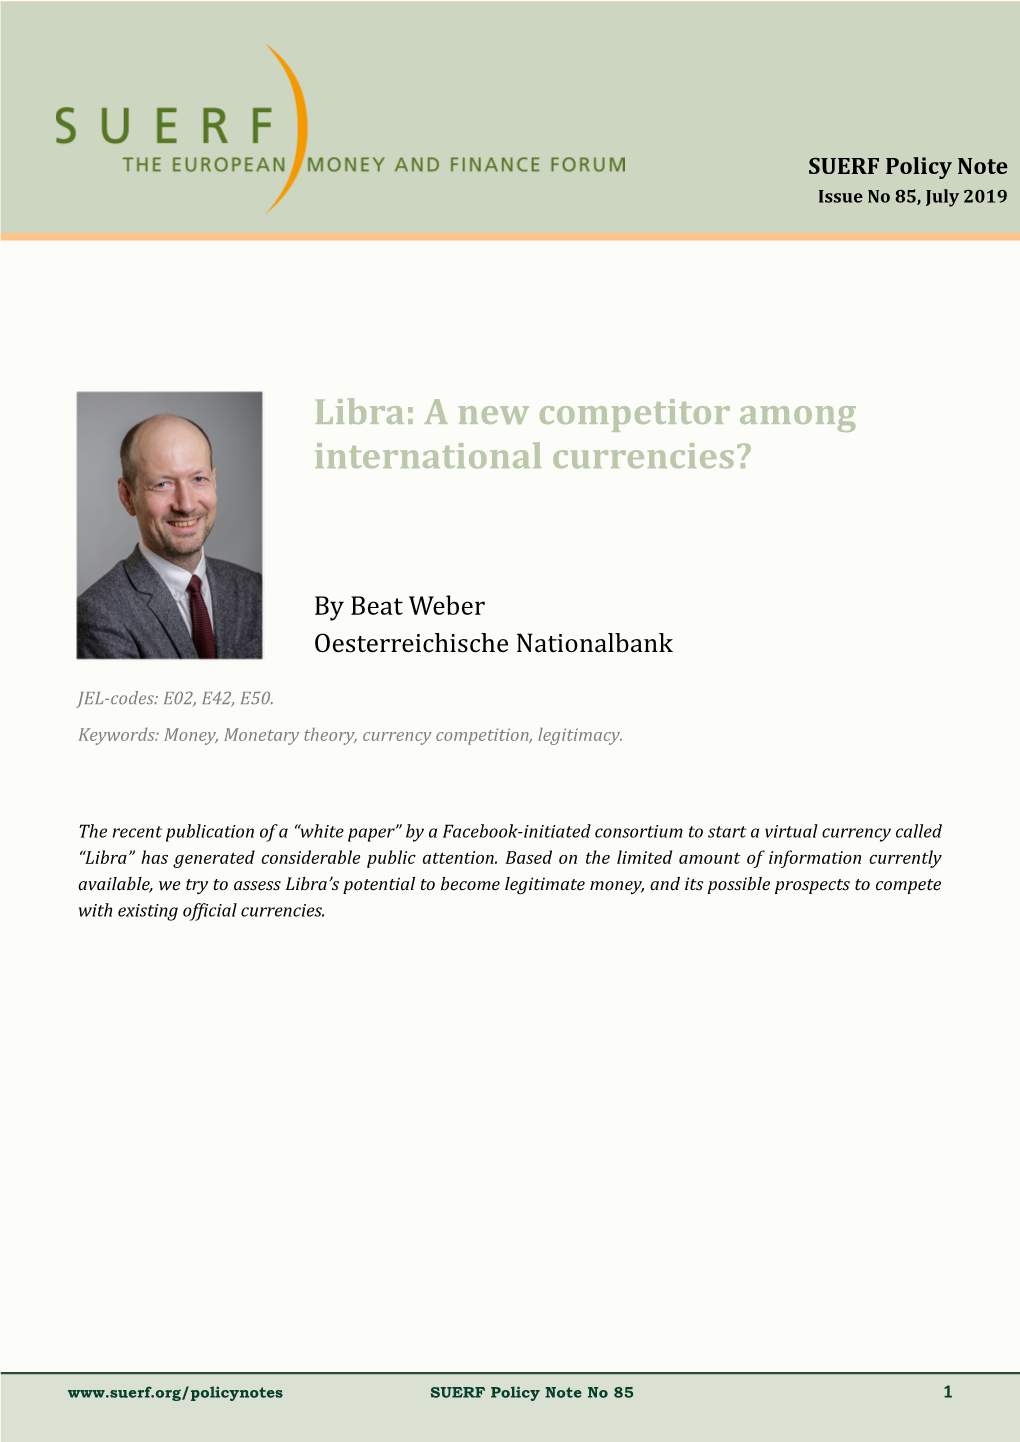 Libra: a New Competitor Among International Currencies?